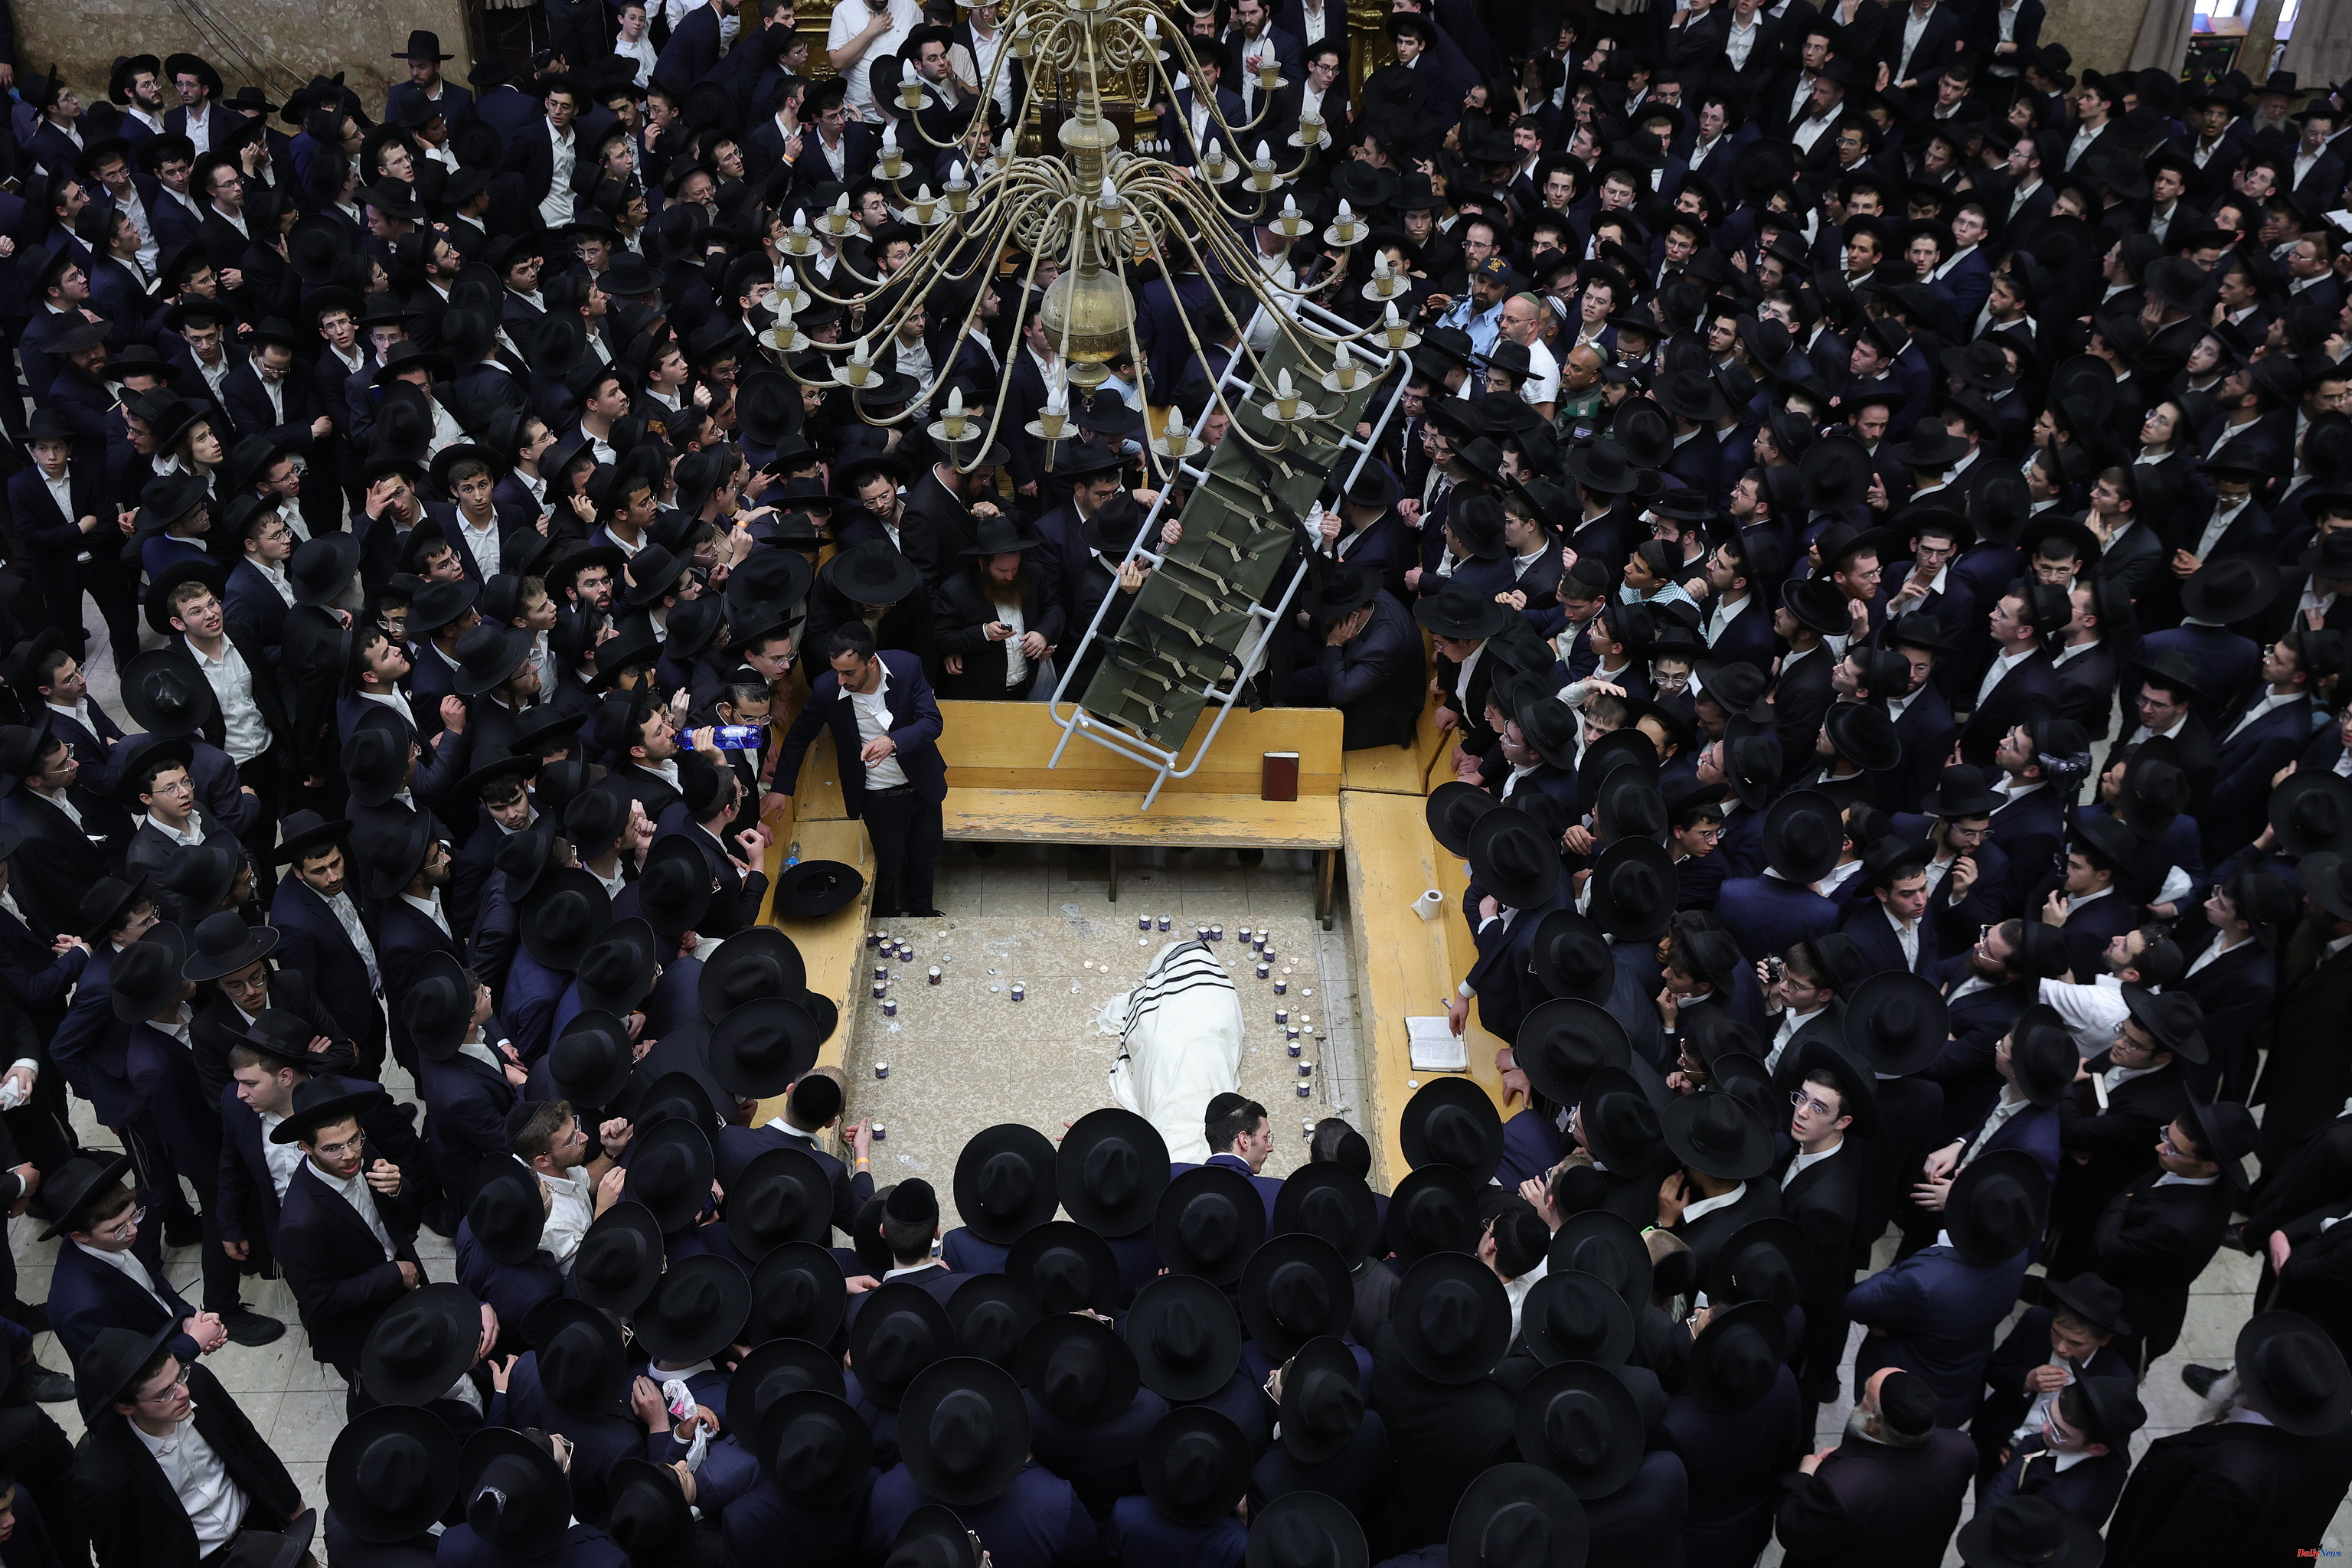 Middle East Some 2,000 police officers guard the massive funeral of prominent Israeli ultra-Orthodox rabbi Gershon Edelstein